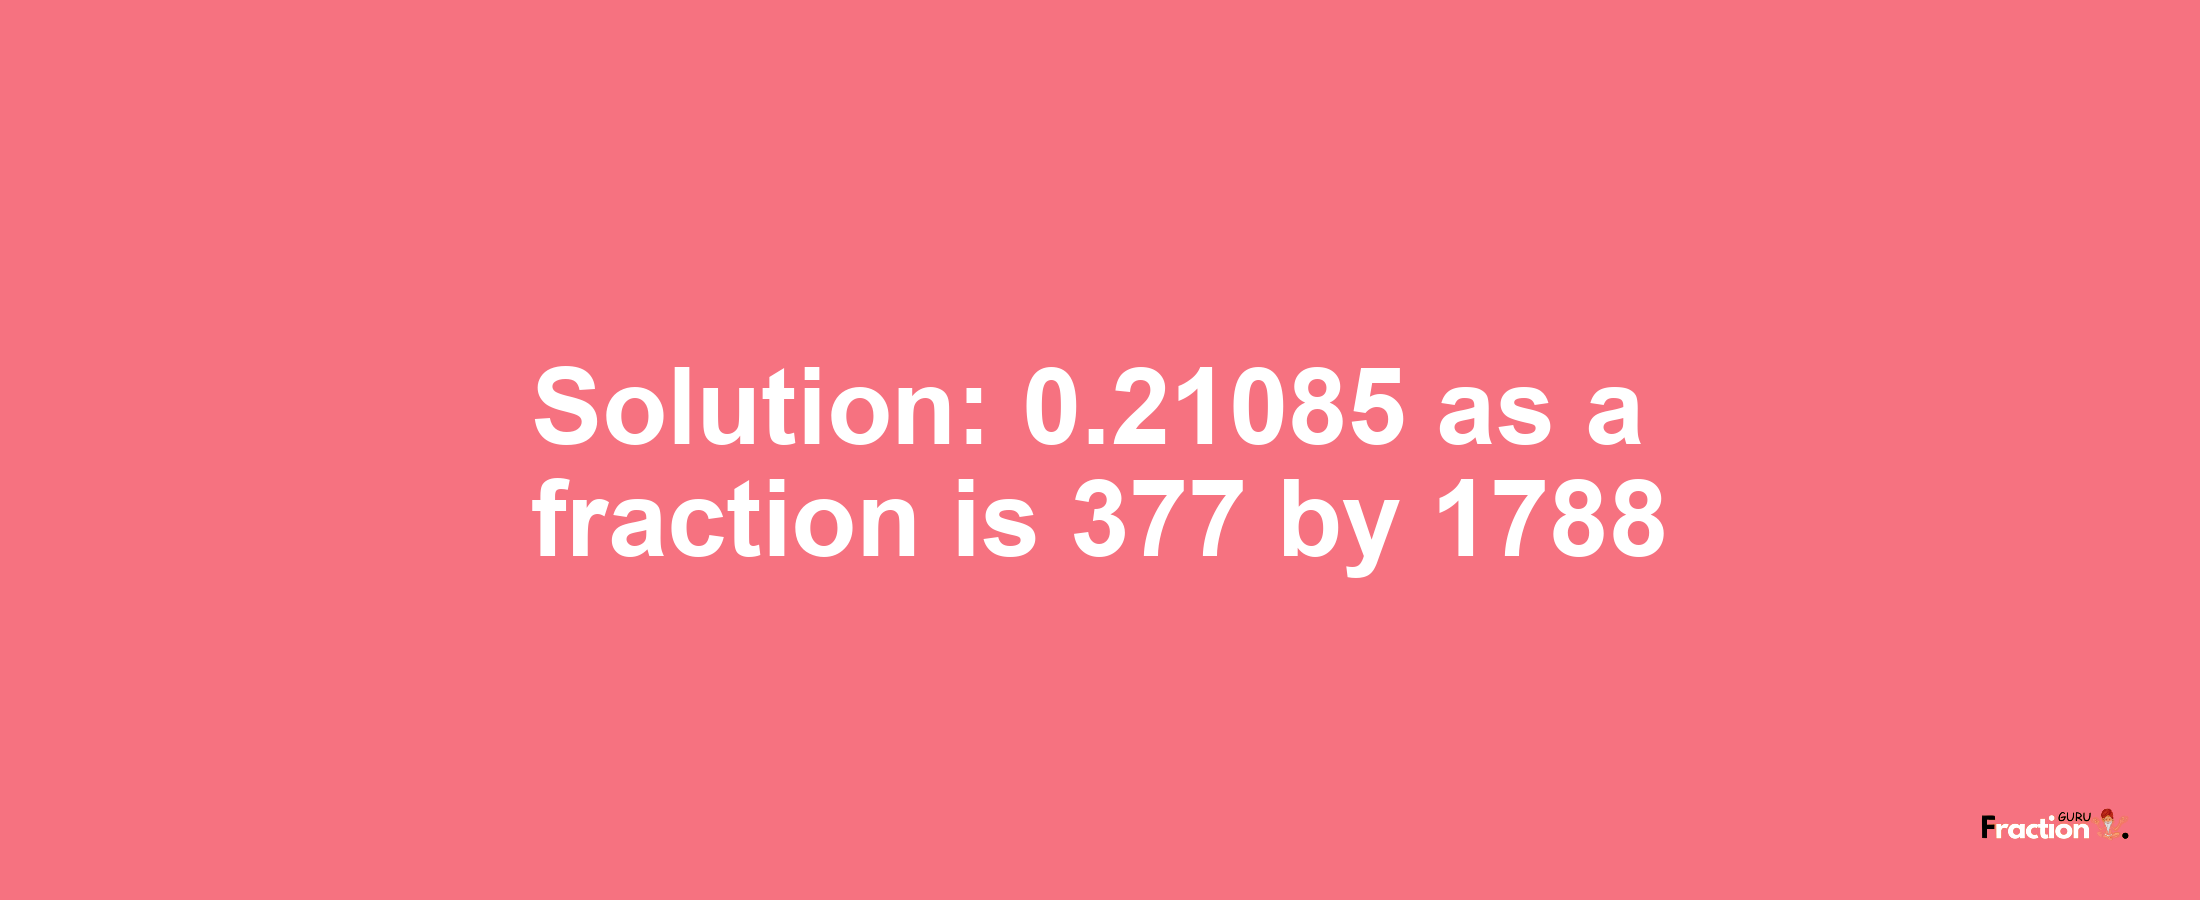 Solution:0.21085 as a fraction is 377/1788